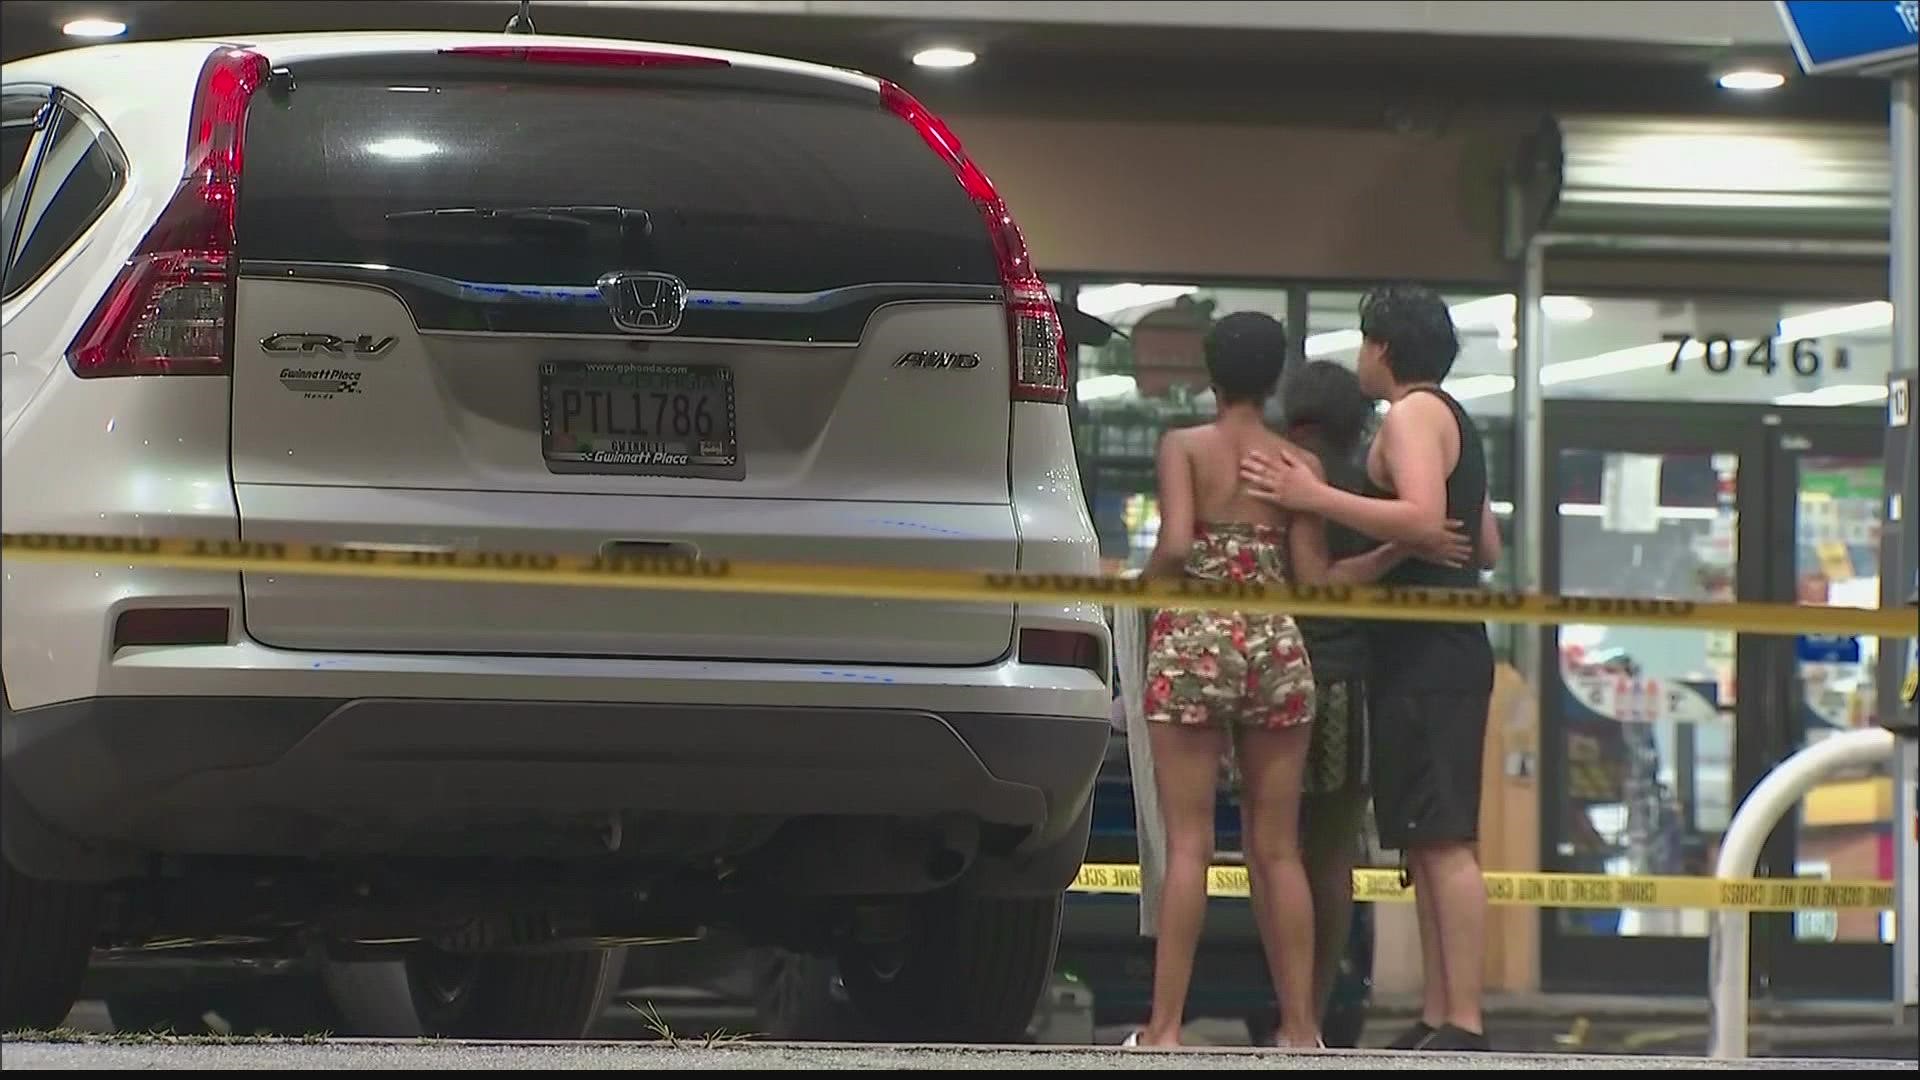 A teenager is dead in DeKalb County after an overnight shooting at a gas station.